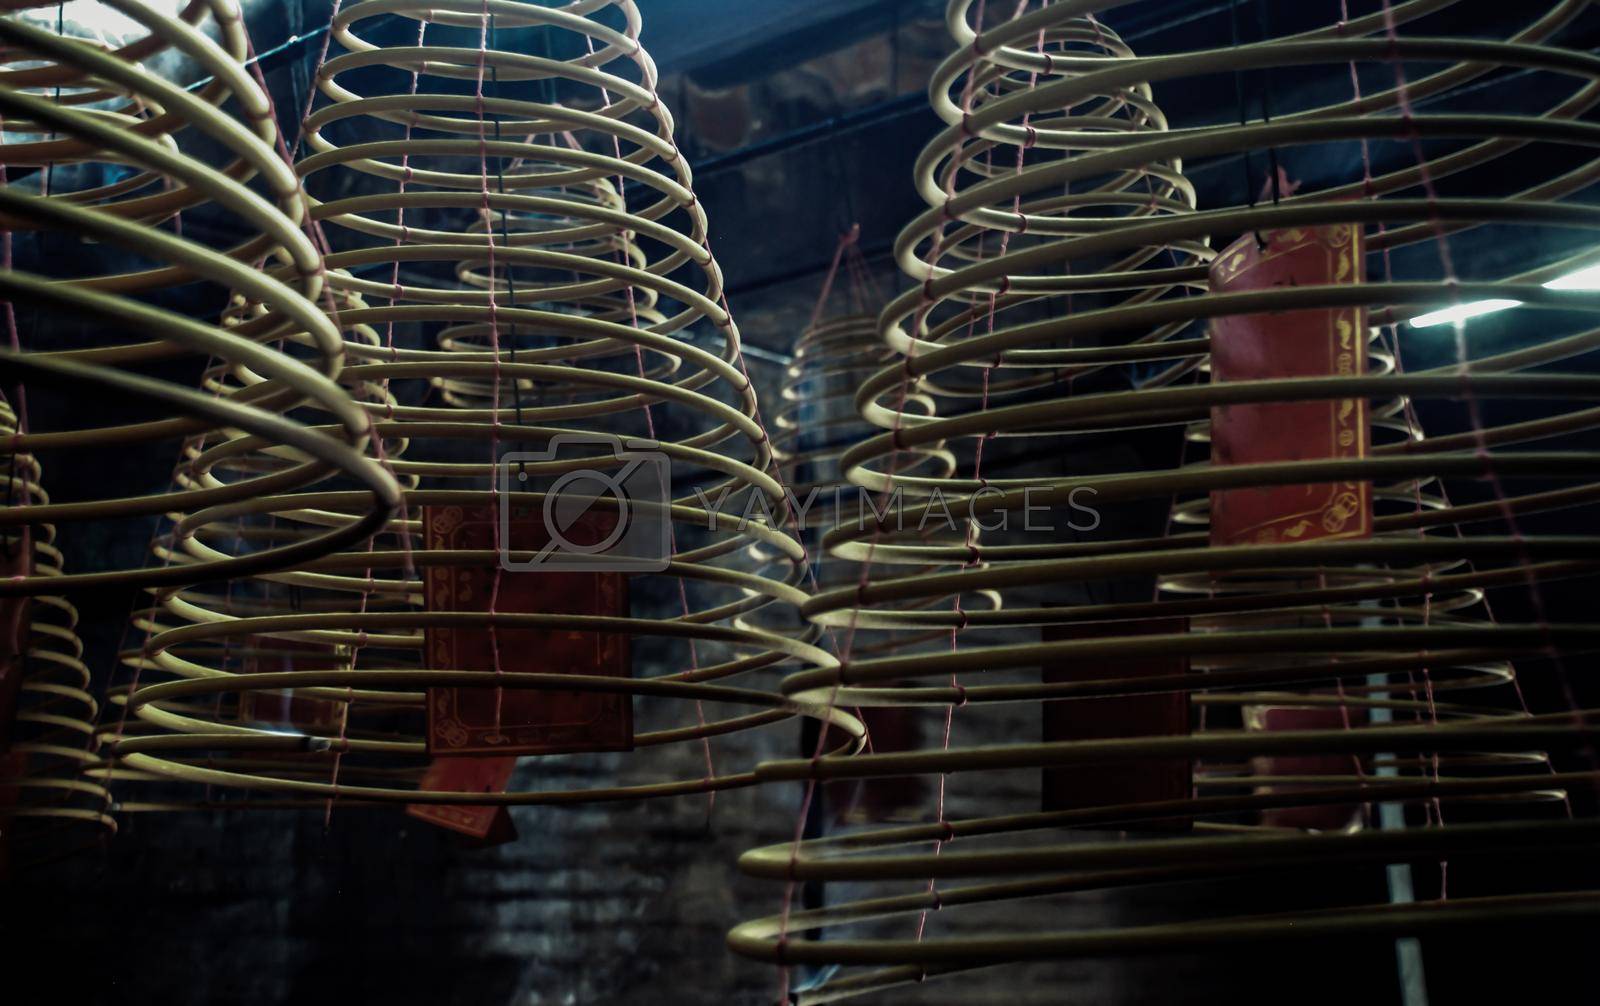 Multiple large yellow incense coils hanging in stacks from the Ceiling in a Chinese shrine. Large Bell Shaped Spiral Incense Coils, Focus and blur.